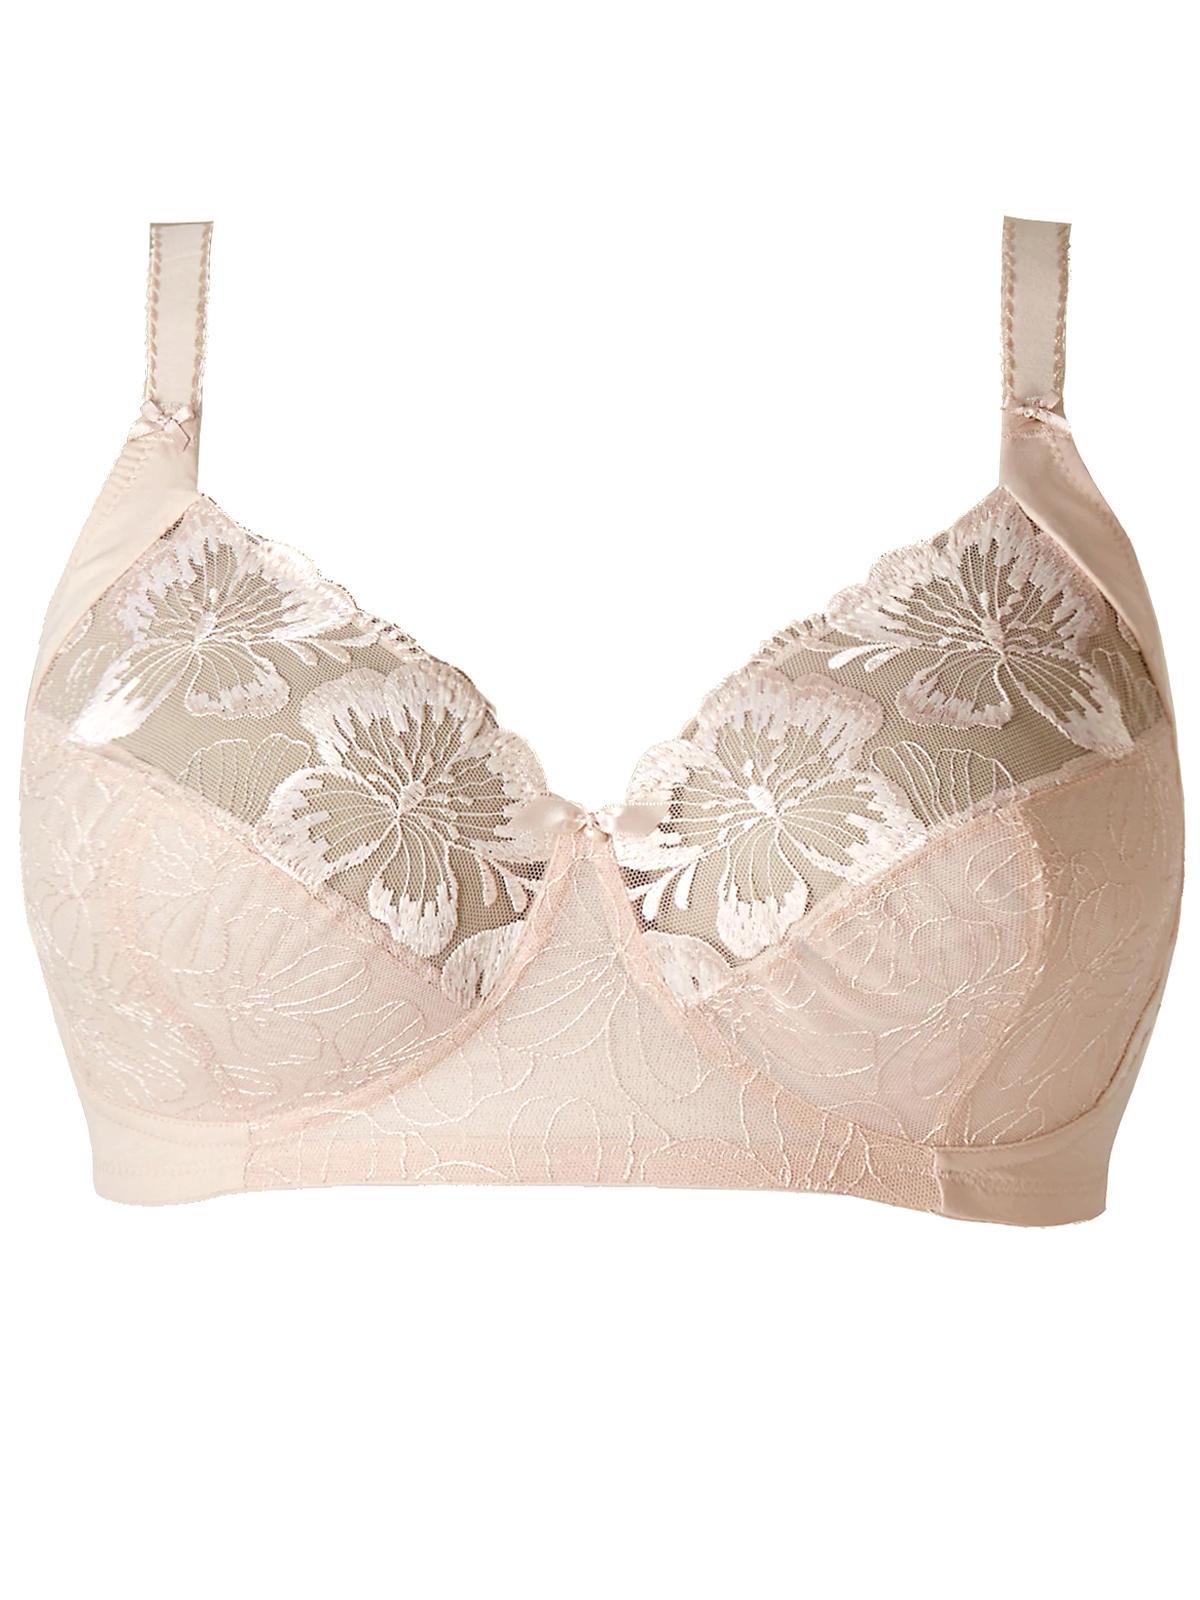 Marks and Spencer - - M&5 ALMOND Embroidered Non-Padded Full Cup Bra ...